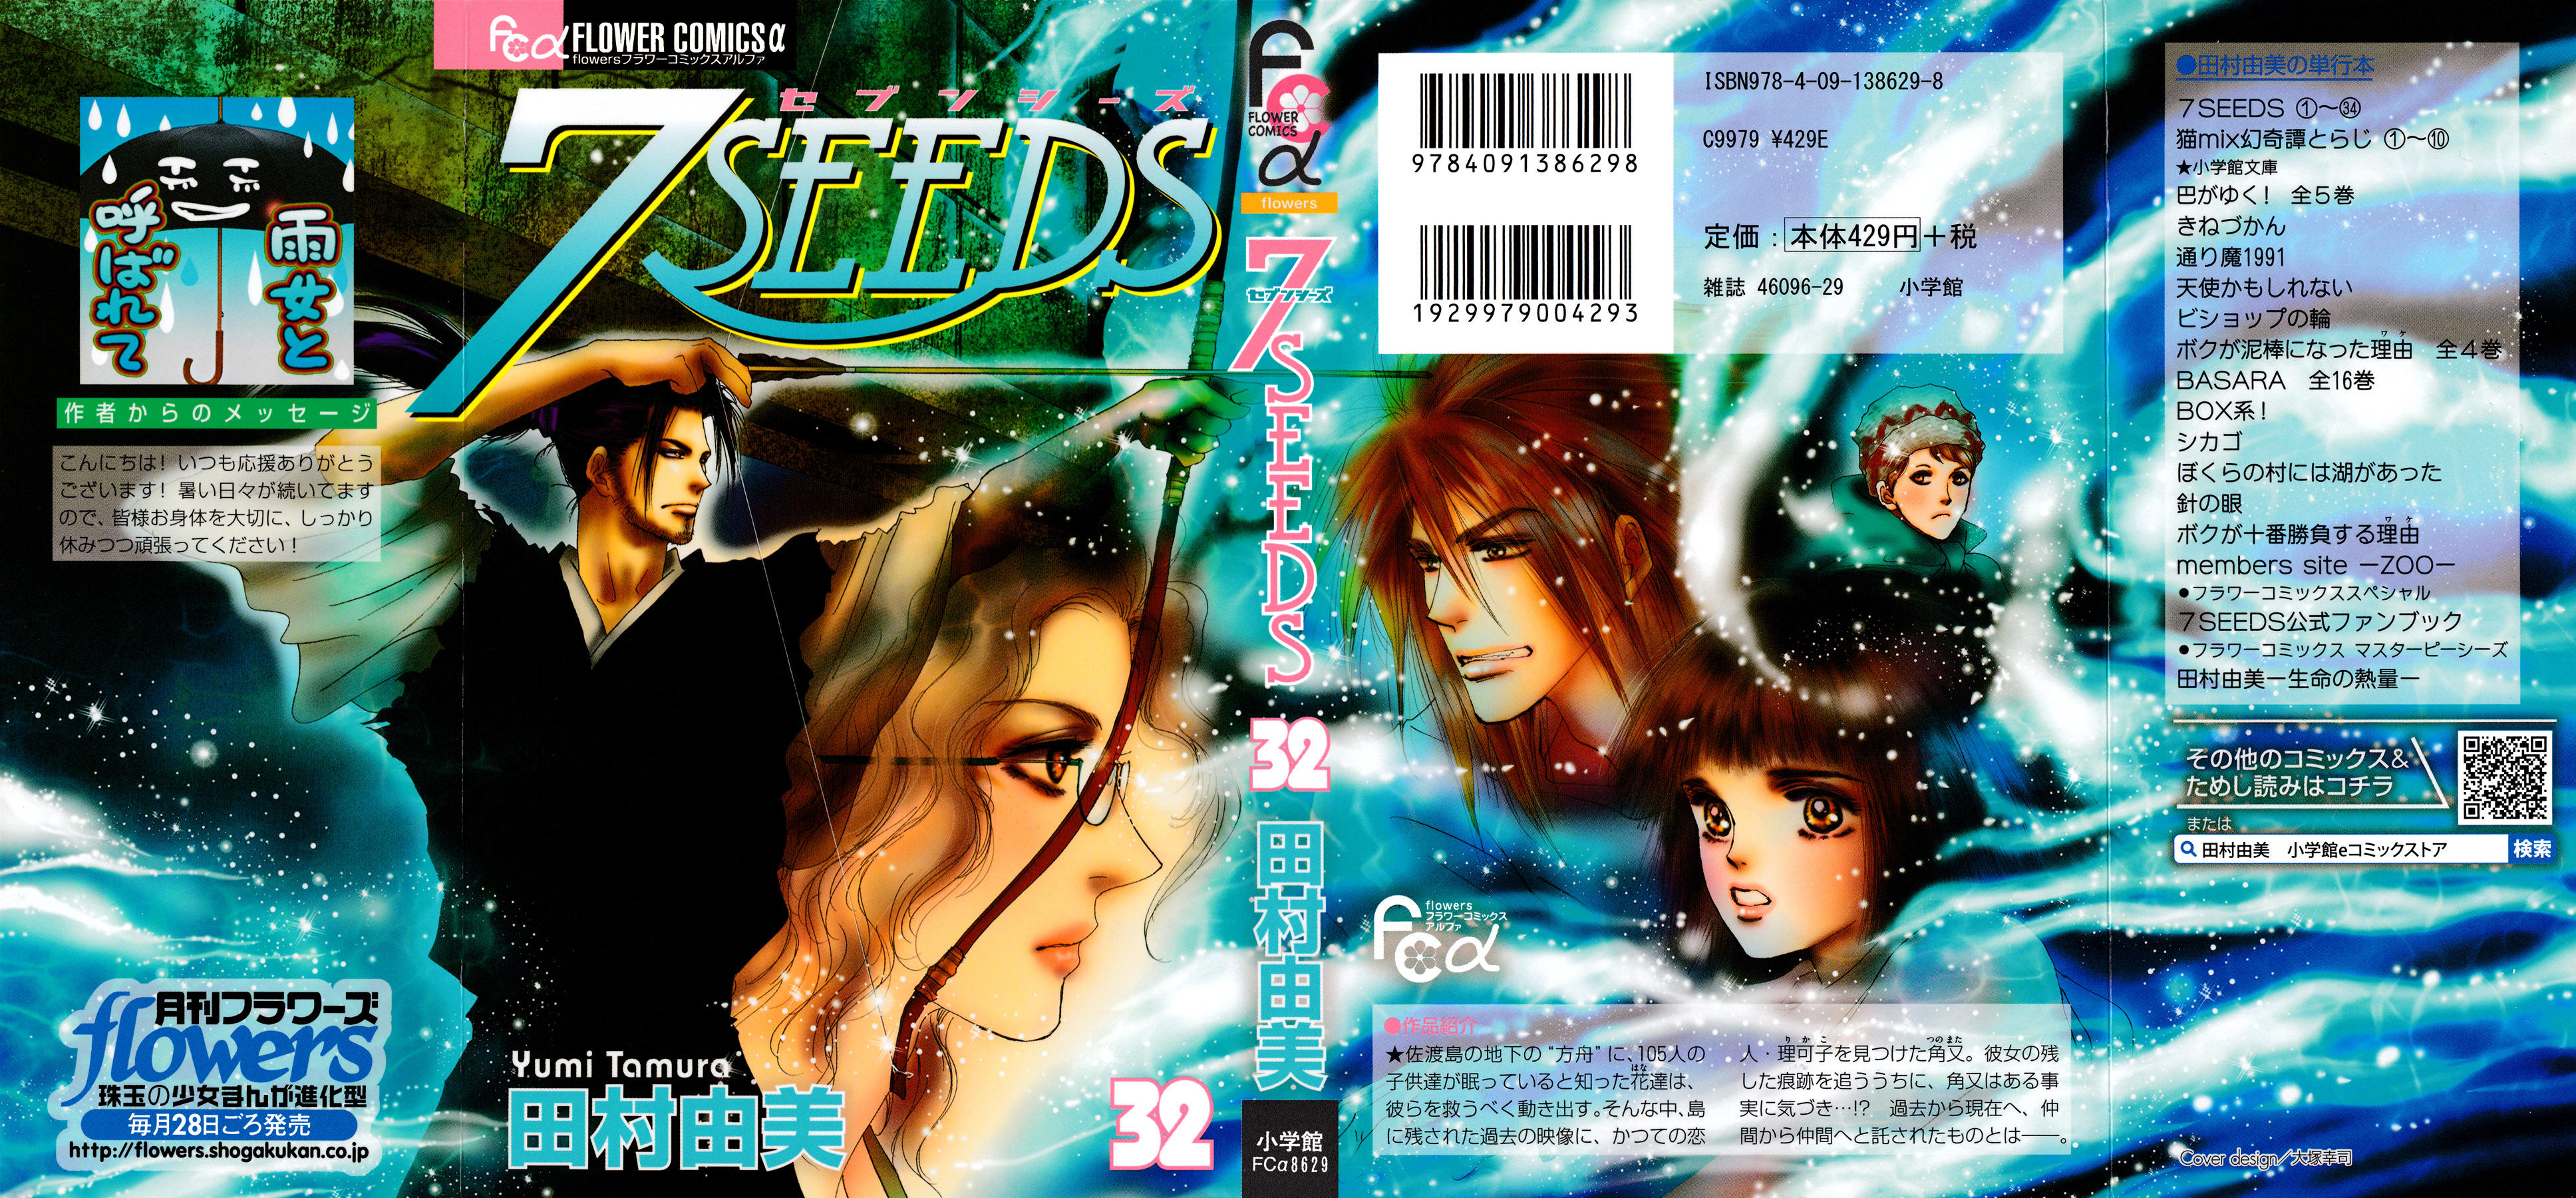 Read 7 Seeds Vol.32 Chapter 162: Mountains Chapter 27 [Reunion] on